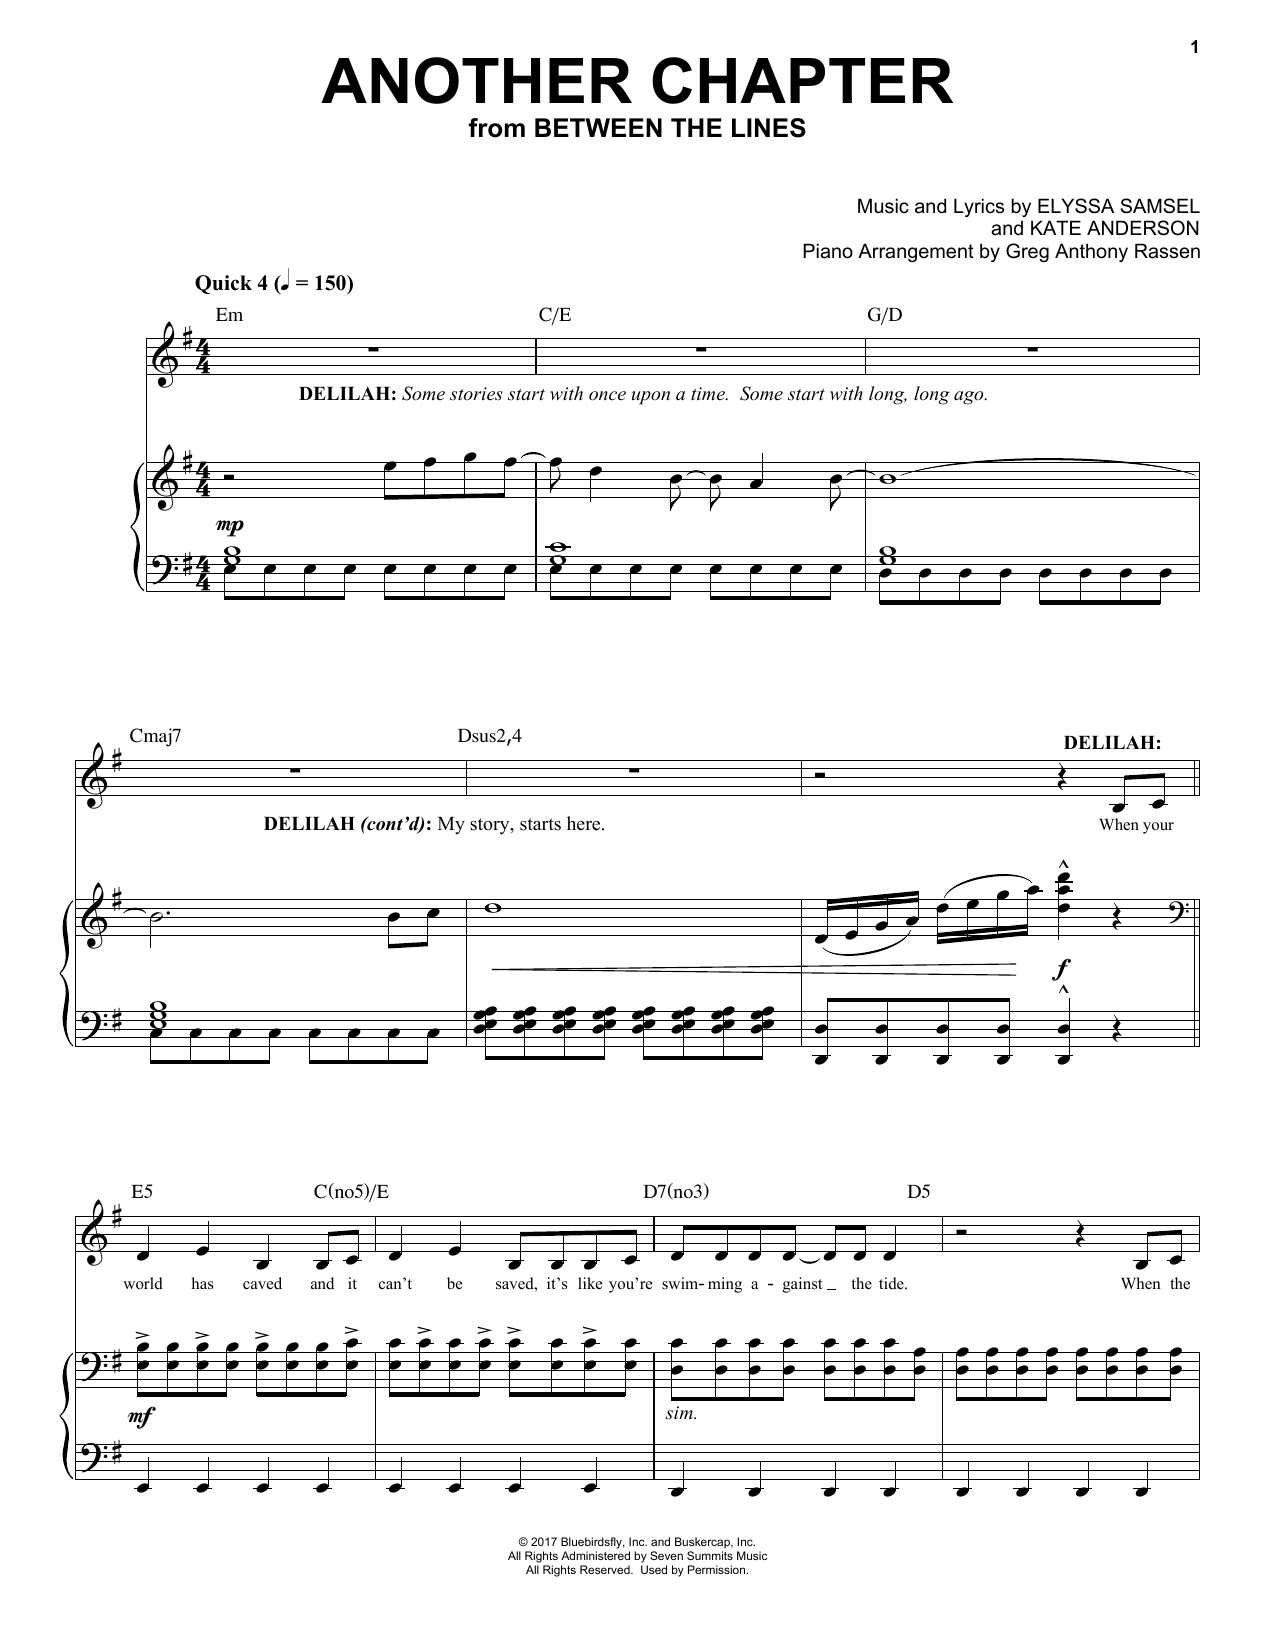 Download Elyssa Samsel & Kate Anderson Another Chapter (from Between The Lines Sheet Music